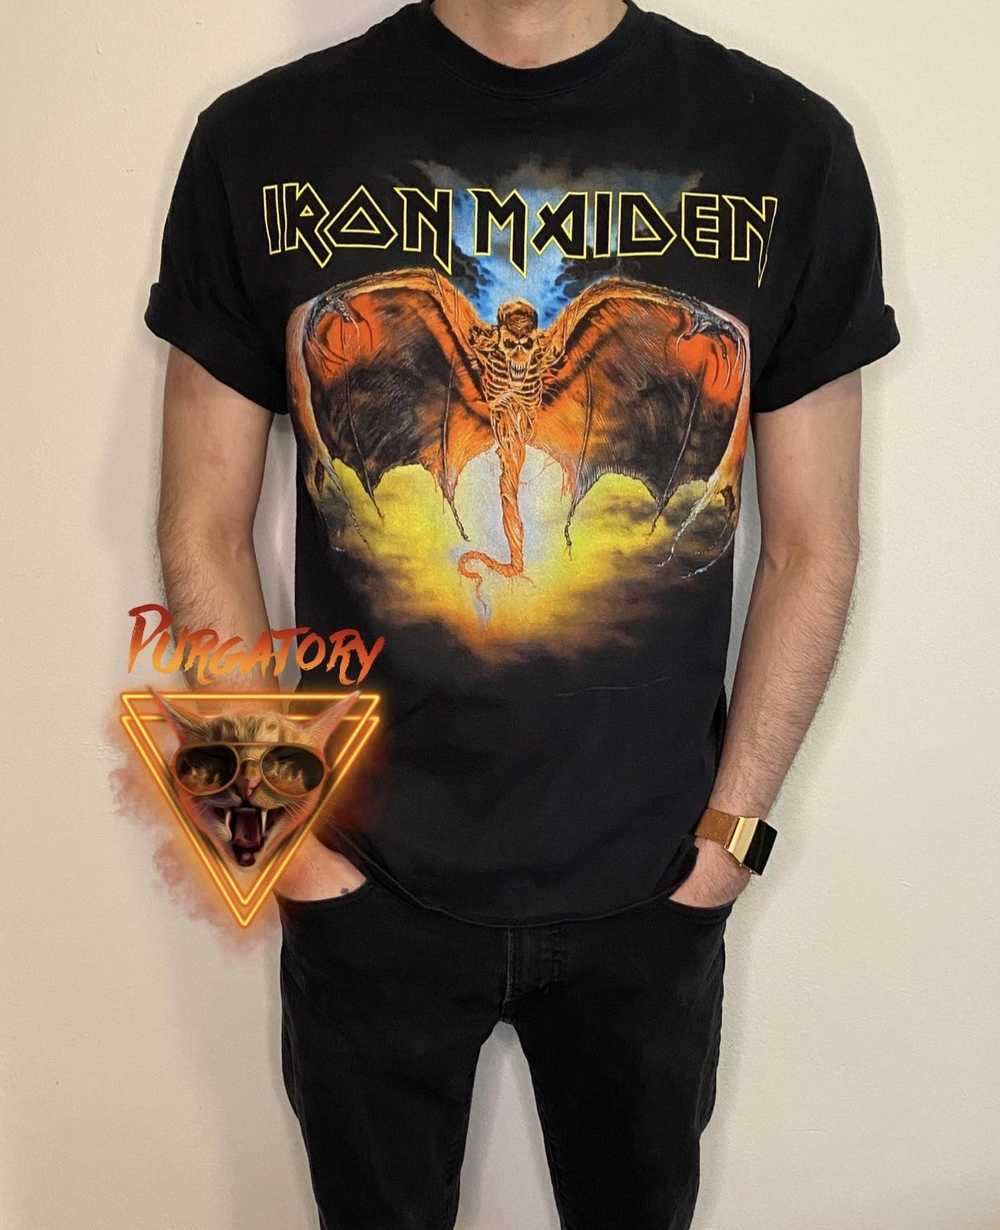 Band Tees × Iron Maiden × Vintage Fear of the Dar… - image 1